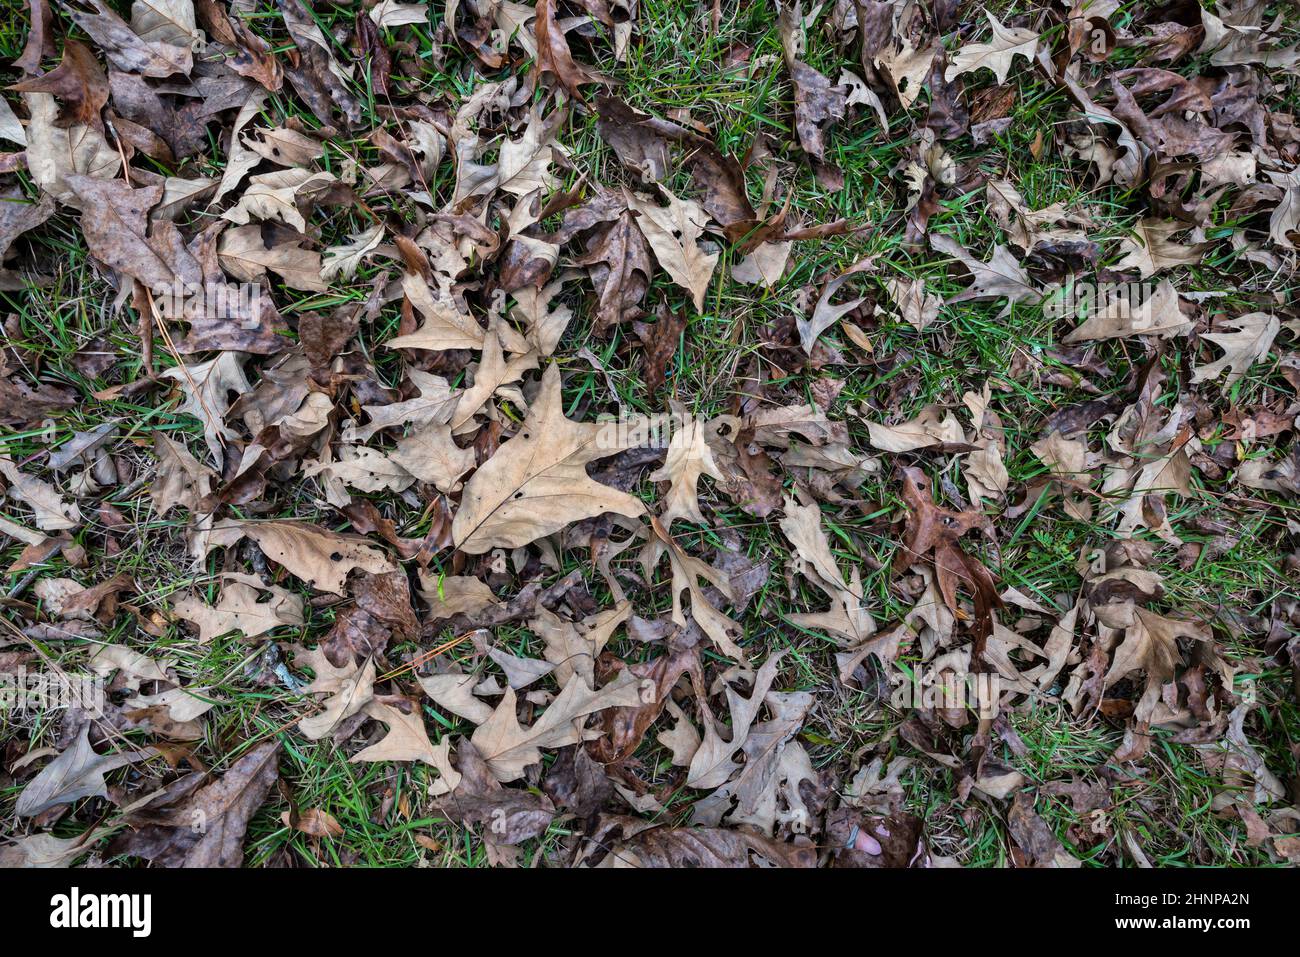 A variety of fallen dead leaves among green grass in early winter, North Central Florida. Stock Photo